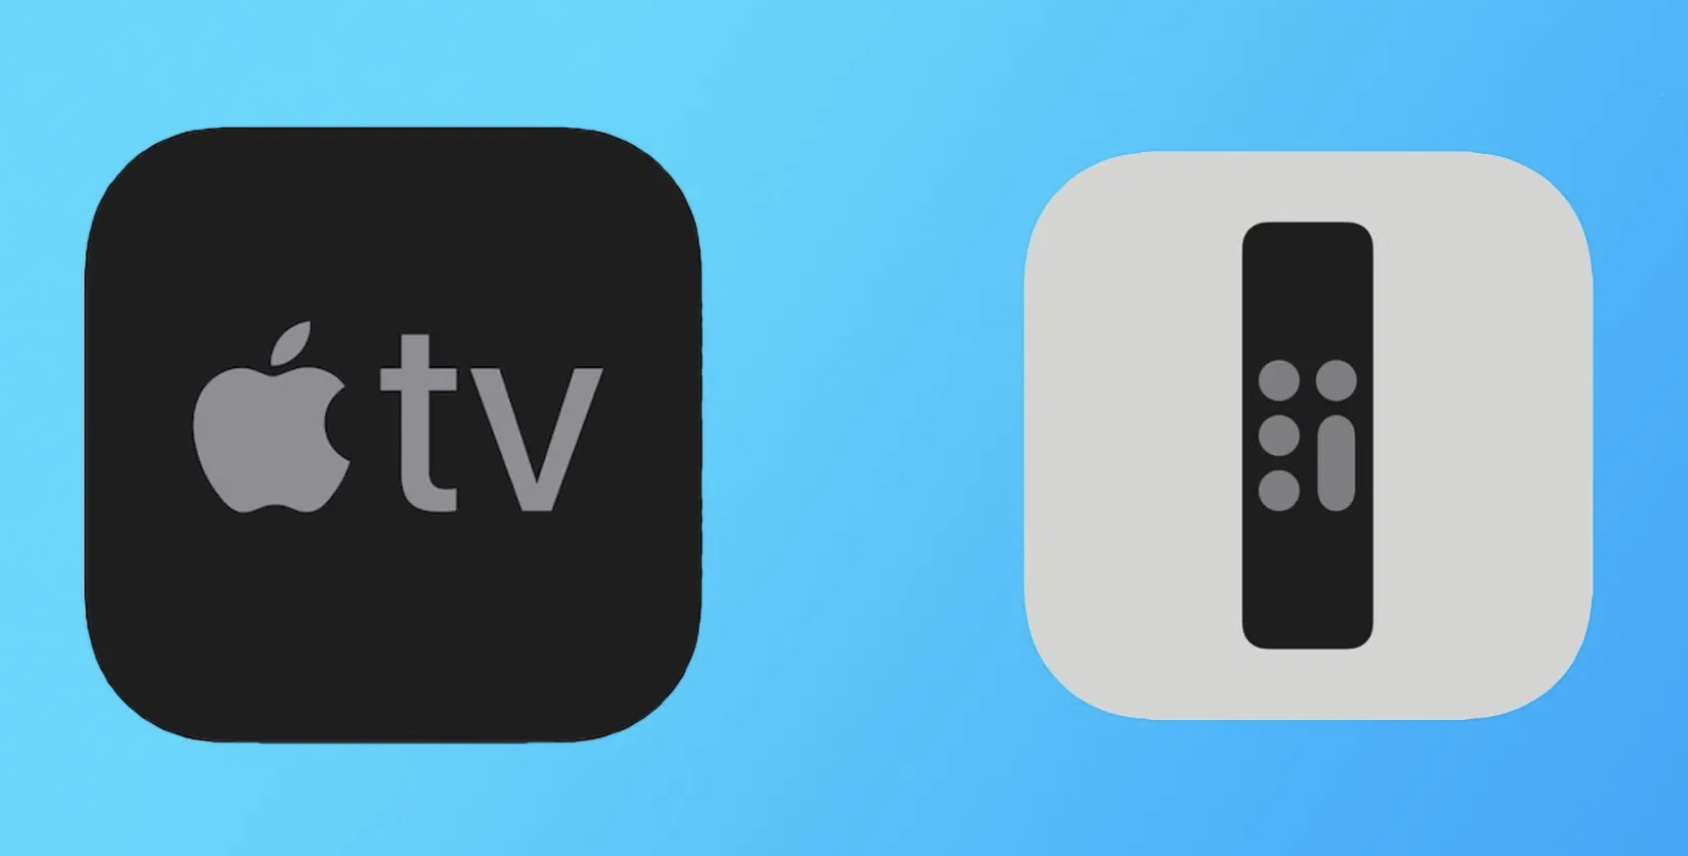  How-to-Pair-iPhone-with-Apple-TV-via-remote-app 